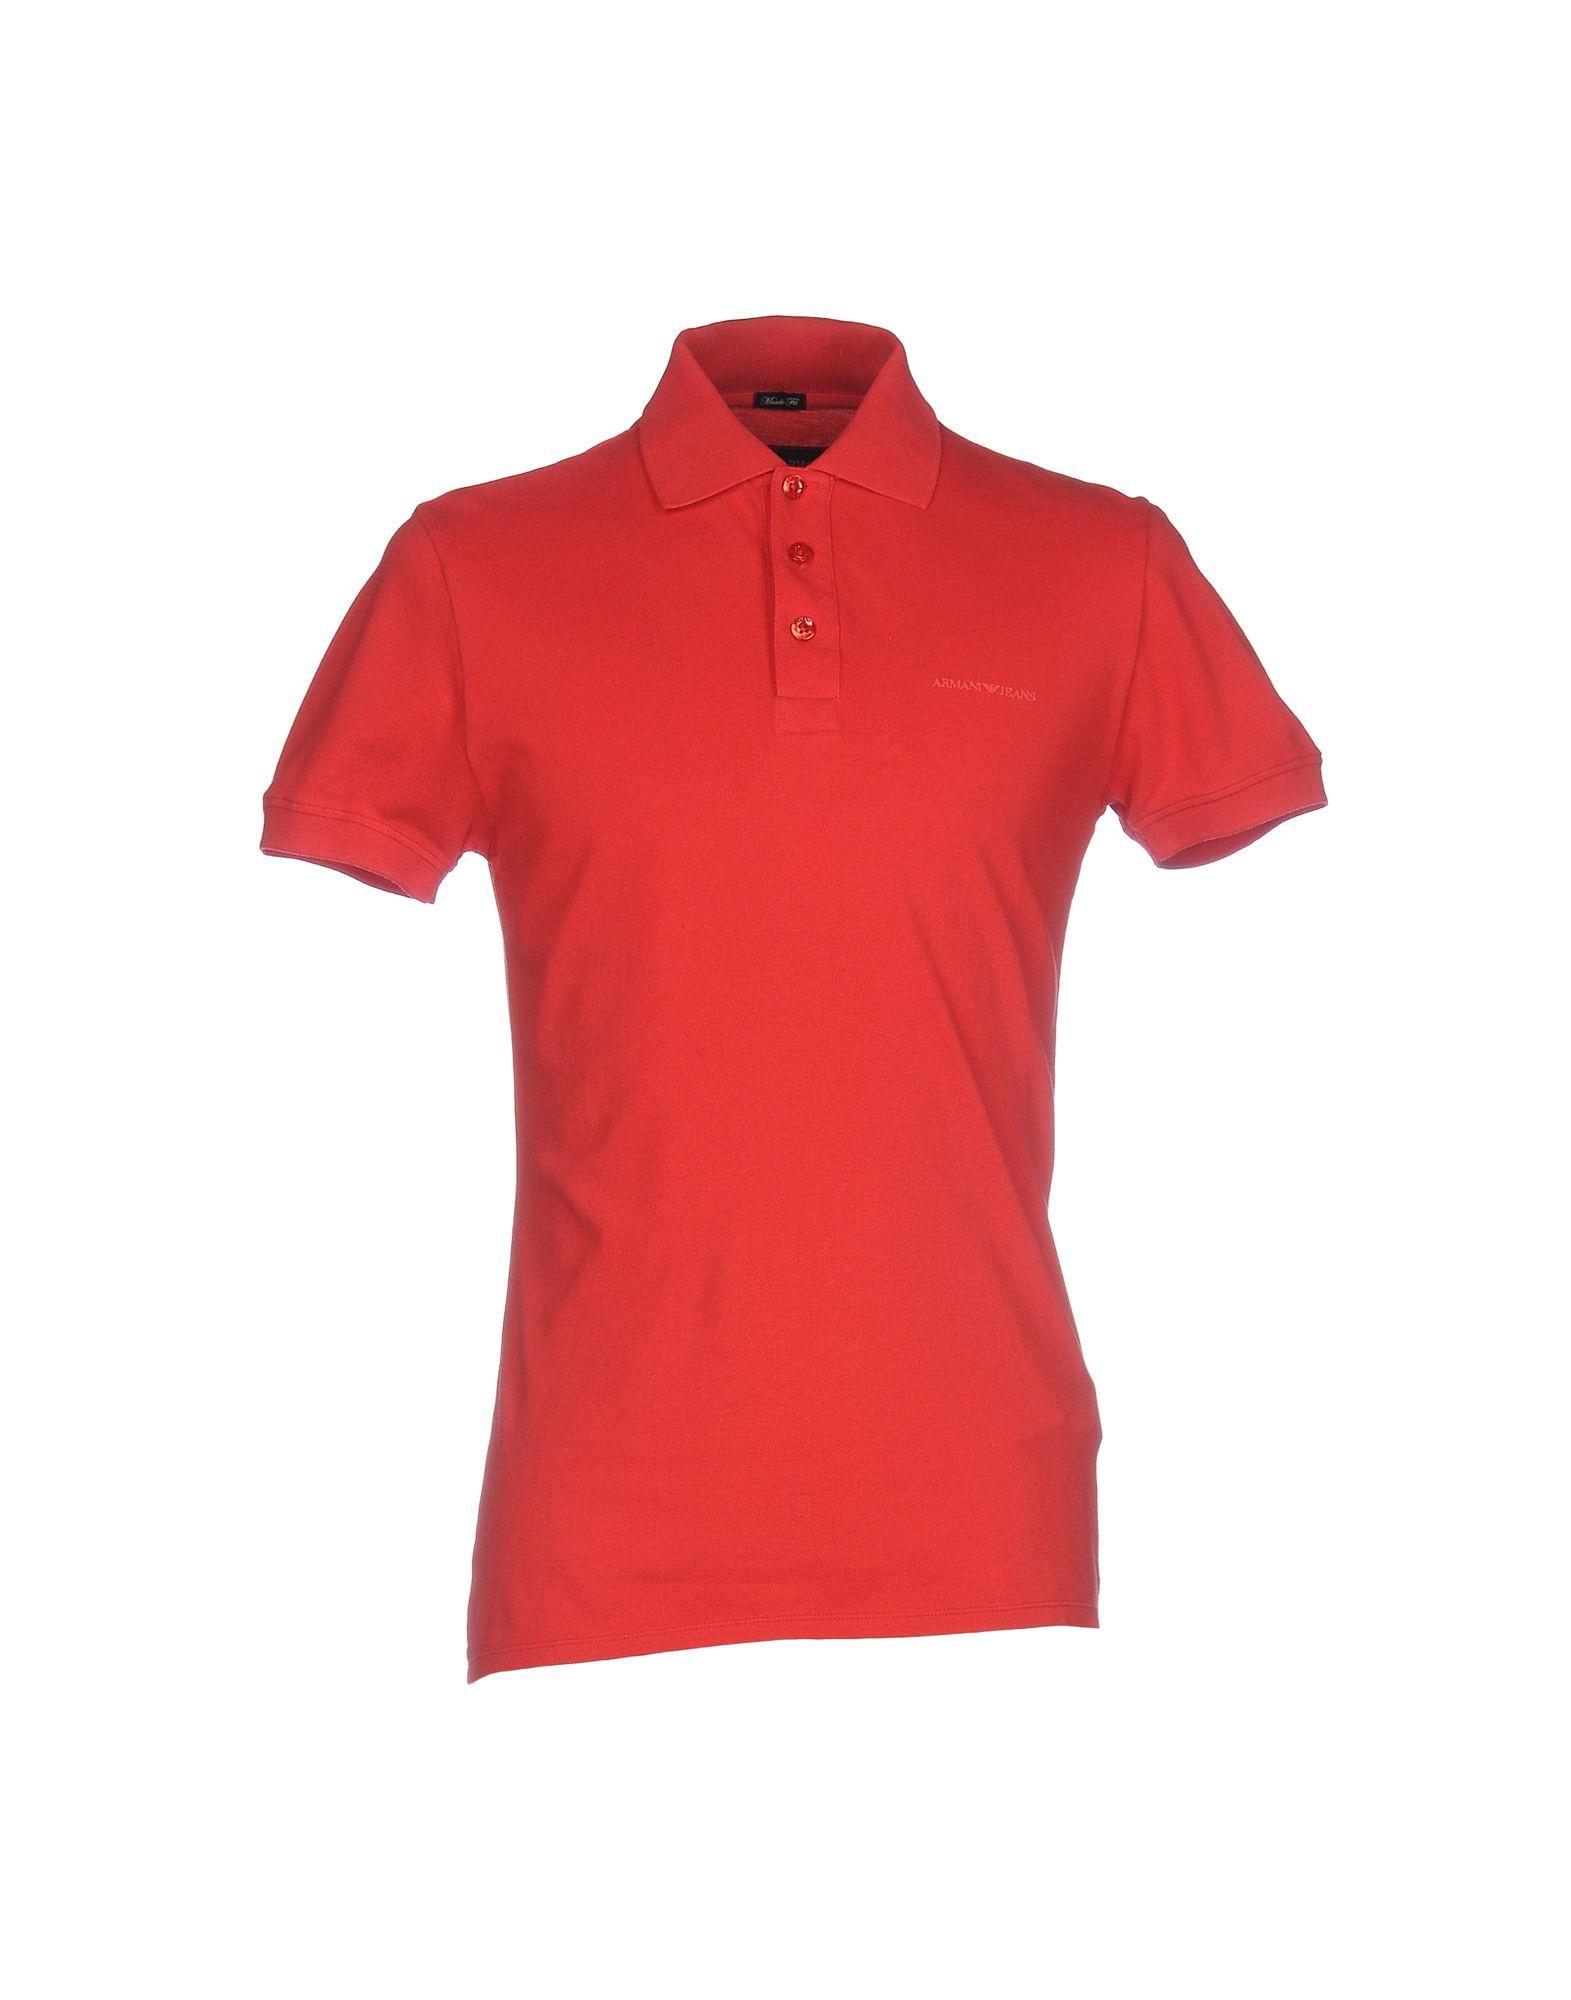 Armani Jeans Cotton Polo Shirt in Red for Men - Lyst